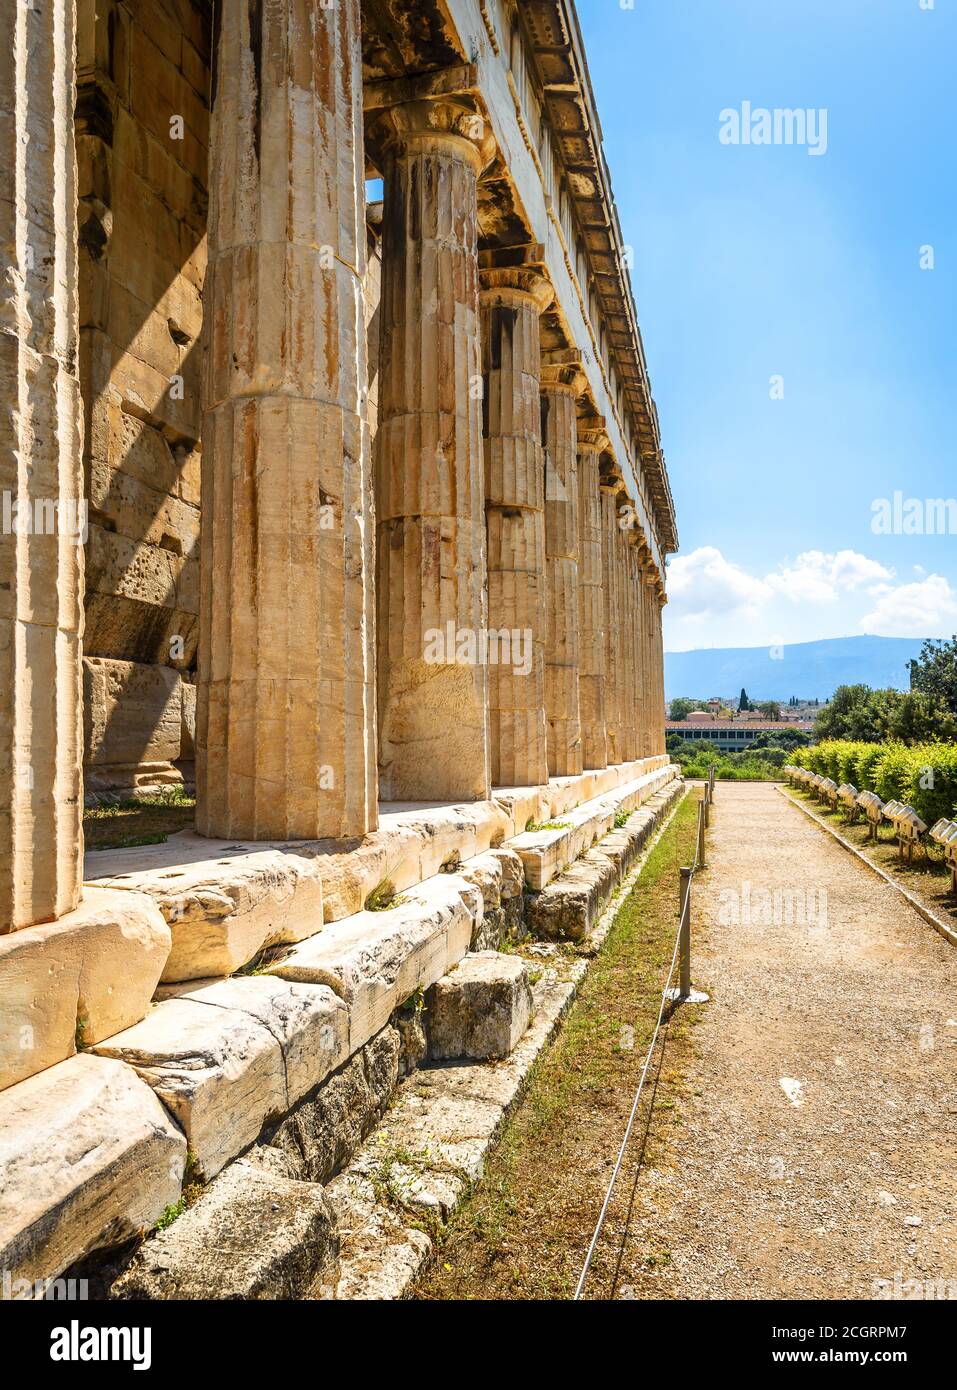 Temple of Hephaestus in Ancient Agora, Athens, Greece. It is famous landmark of Athens. Perspective view of classical Greek building on sunny day, rem Stock Photo